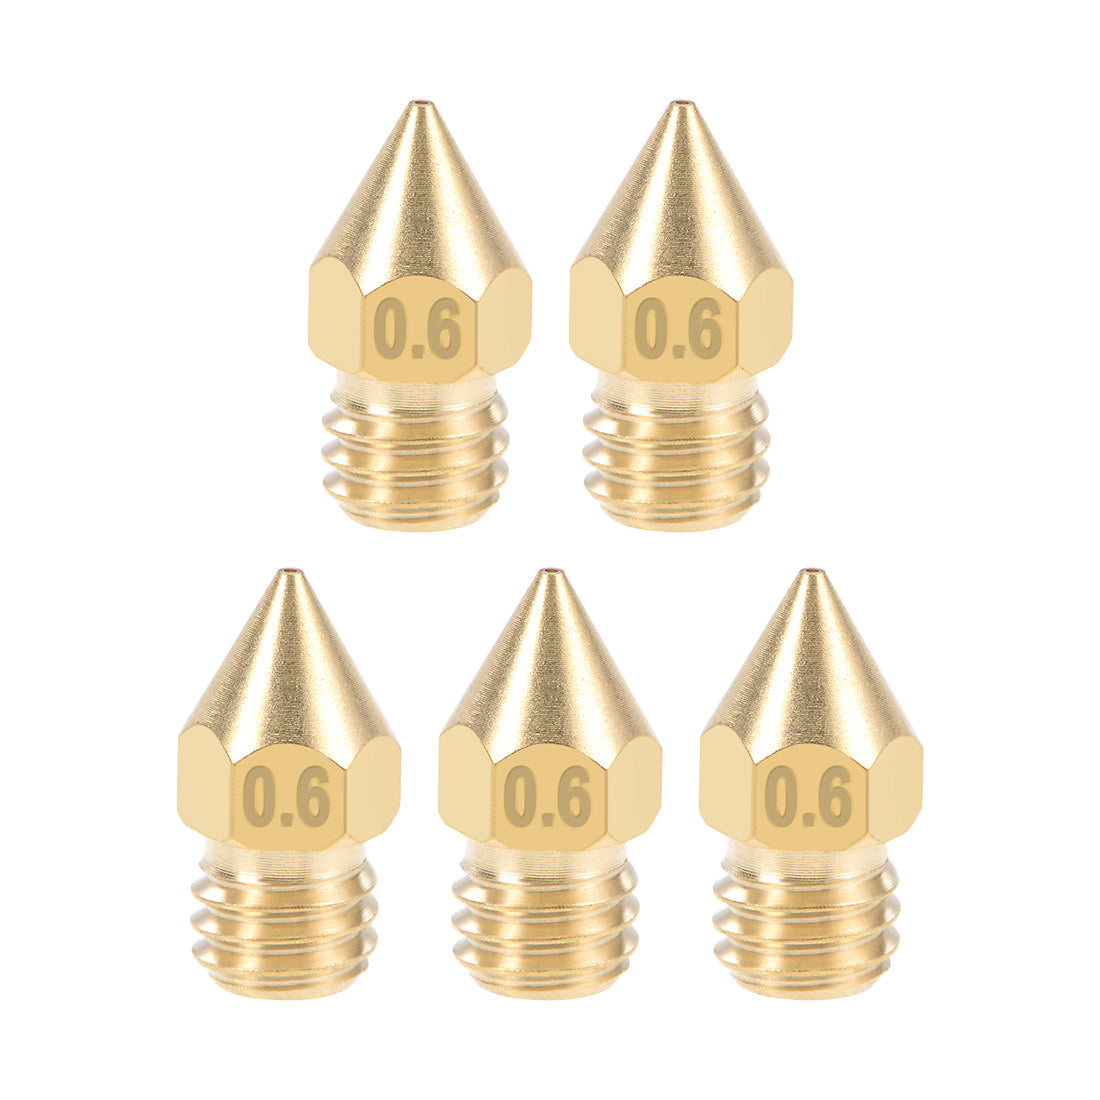 uxcell Uxcell 0.6mm 3D Printer Nozzle Head M6 for MK8 1.75mm Extruder Print, Brass 5pcs